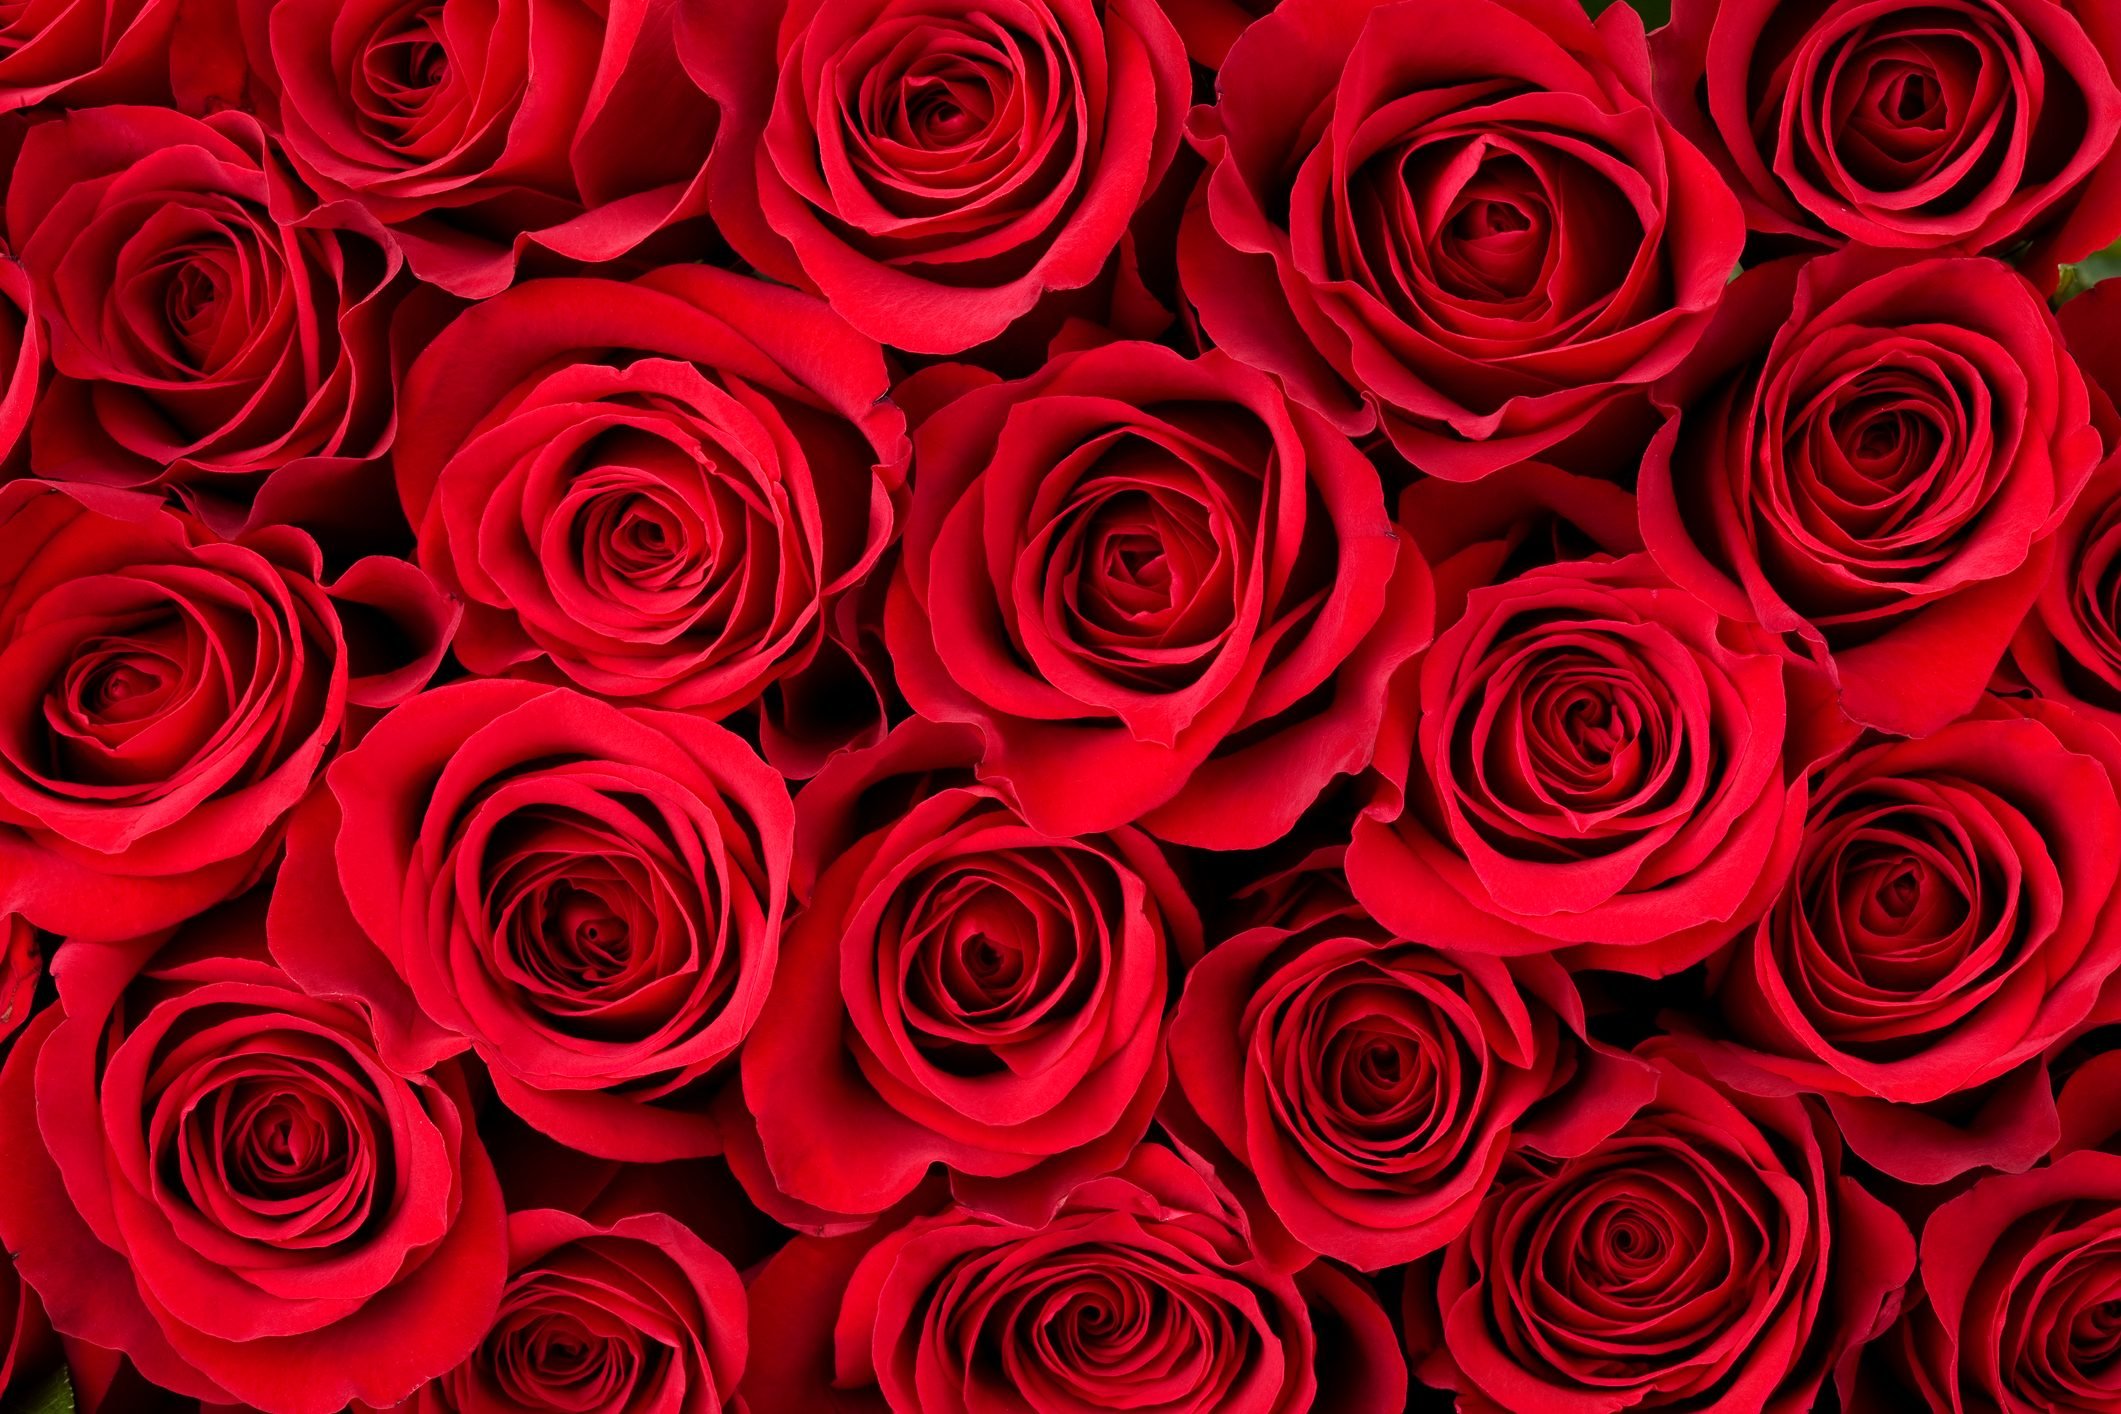 Two Dozen Red Roses - Send to Waterford, Norfolk County, ON Today!